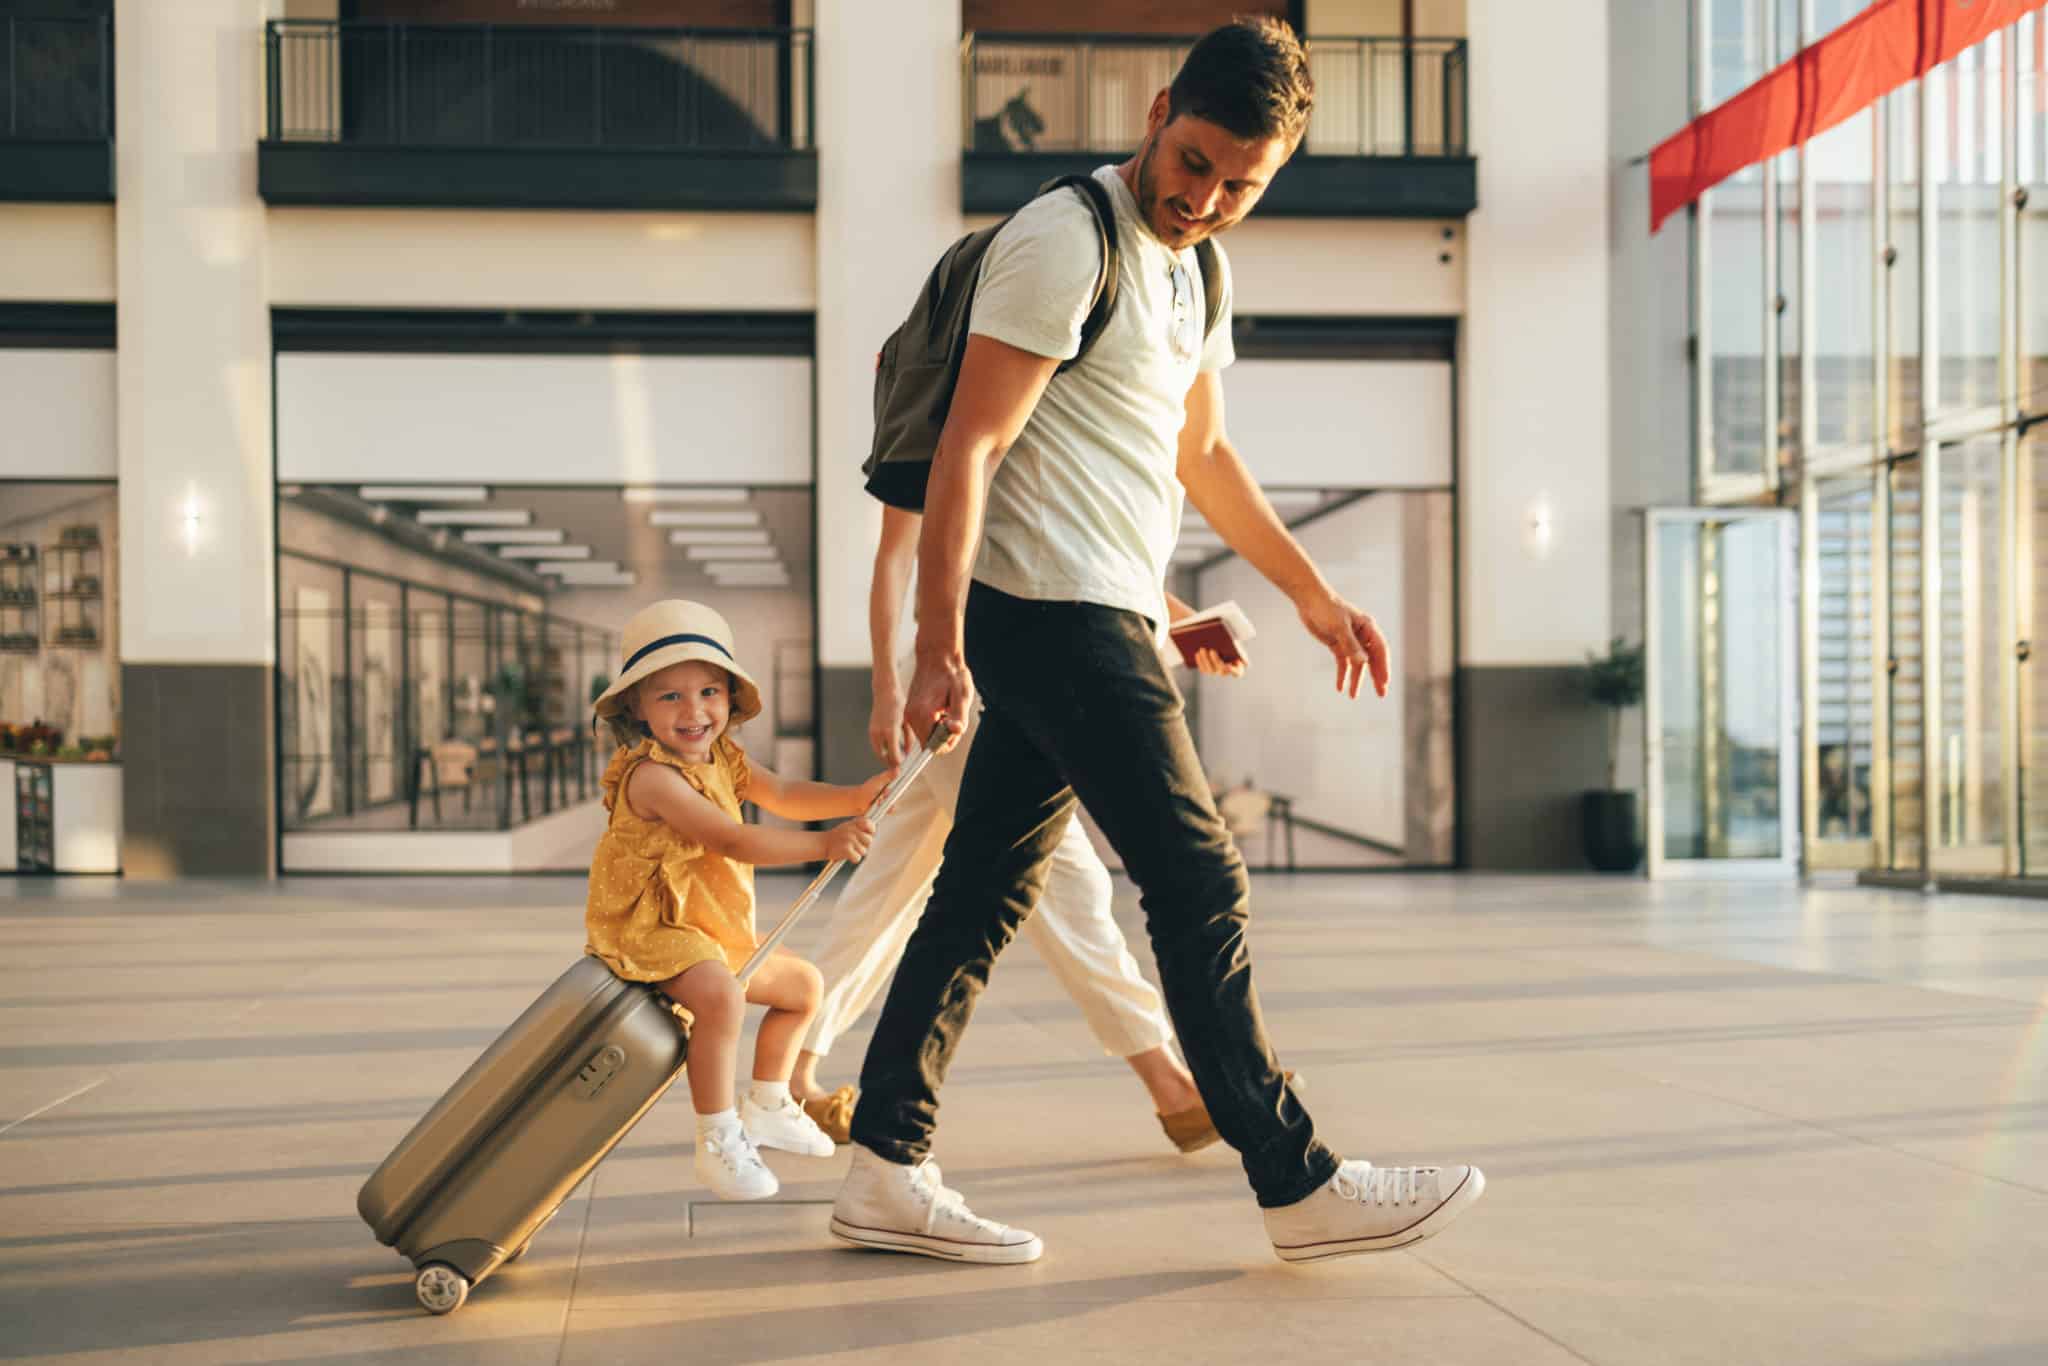 4 Smart Luggage Options for Smarter Travel